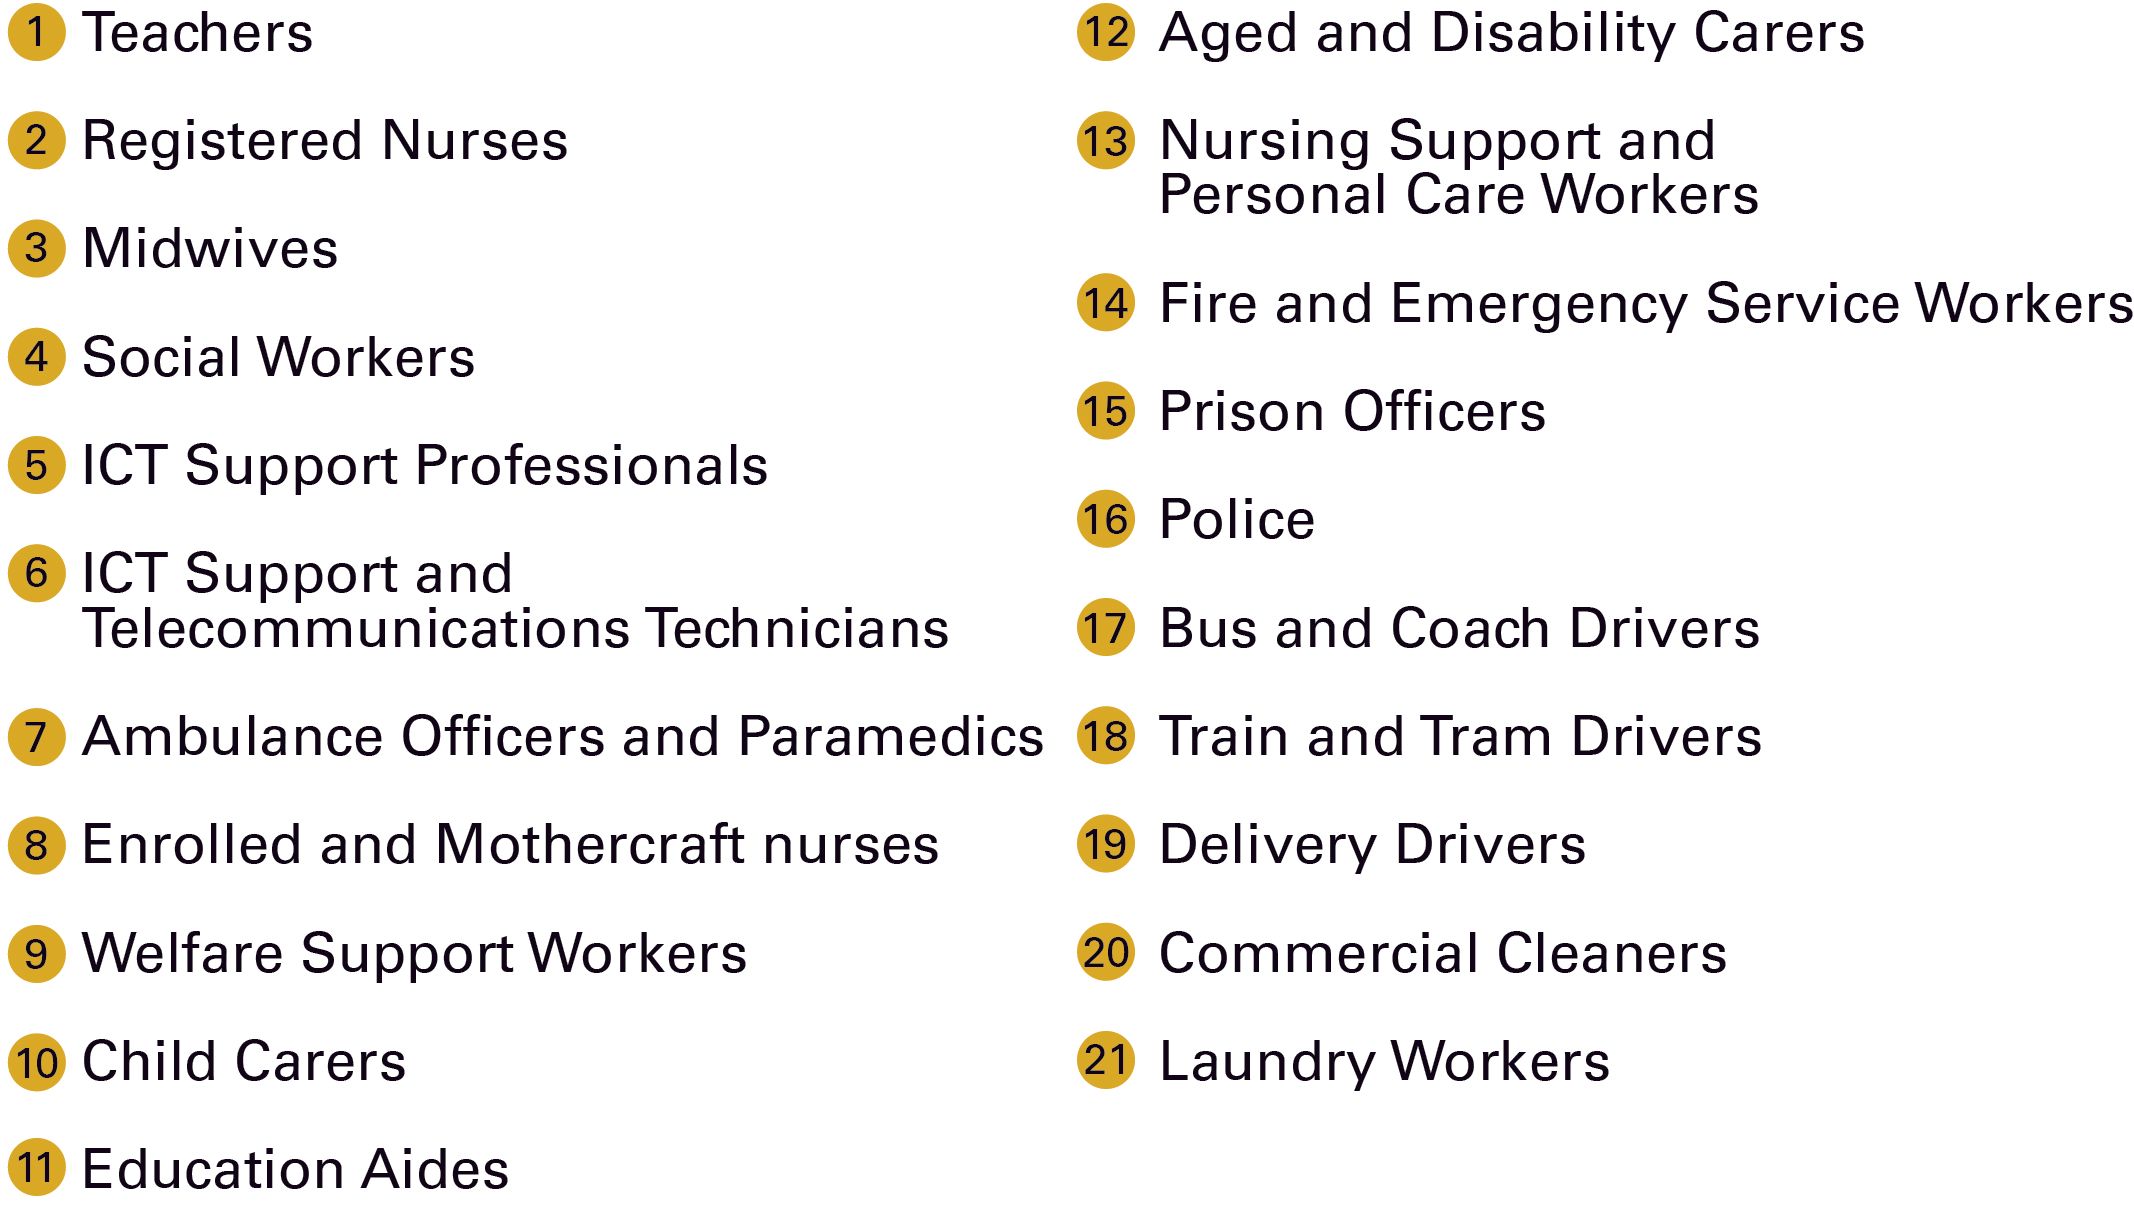 List of 21 essential occupations: Teachers, registered nurses, midwives, social workers, ICT Support professionals, ICT Support and Telecommunications Technicians, Ambulance Officers and Paramedics, Enrolled and Mothercraft nurses, Welfare Support Workers, Child Carers, Education Aides, Aged and Disability Carers, Nursing Support and Personal Care Workers, Fire and Emergency Service Workers, Prison Officers, Police, Bus and Coach Drivers, Train and Tram Drivers, Delivery Drivers, Commercial Cleaners, Laundry Workers.